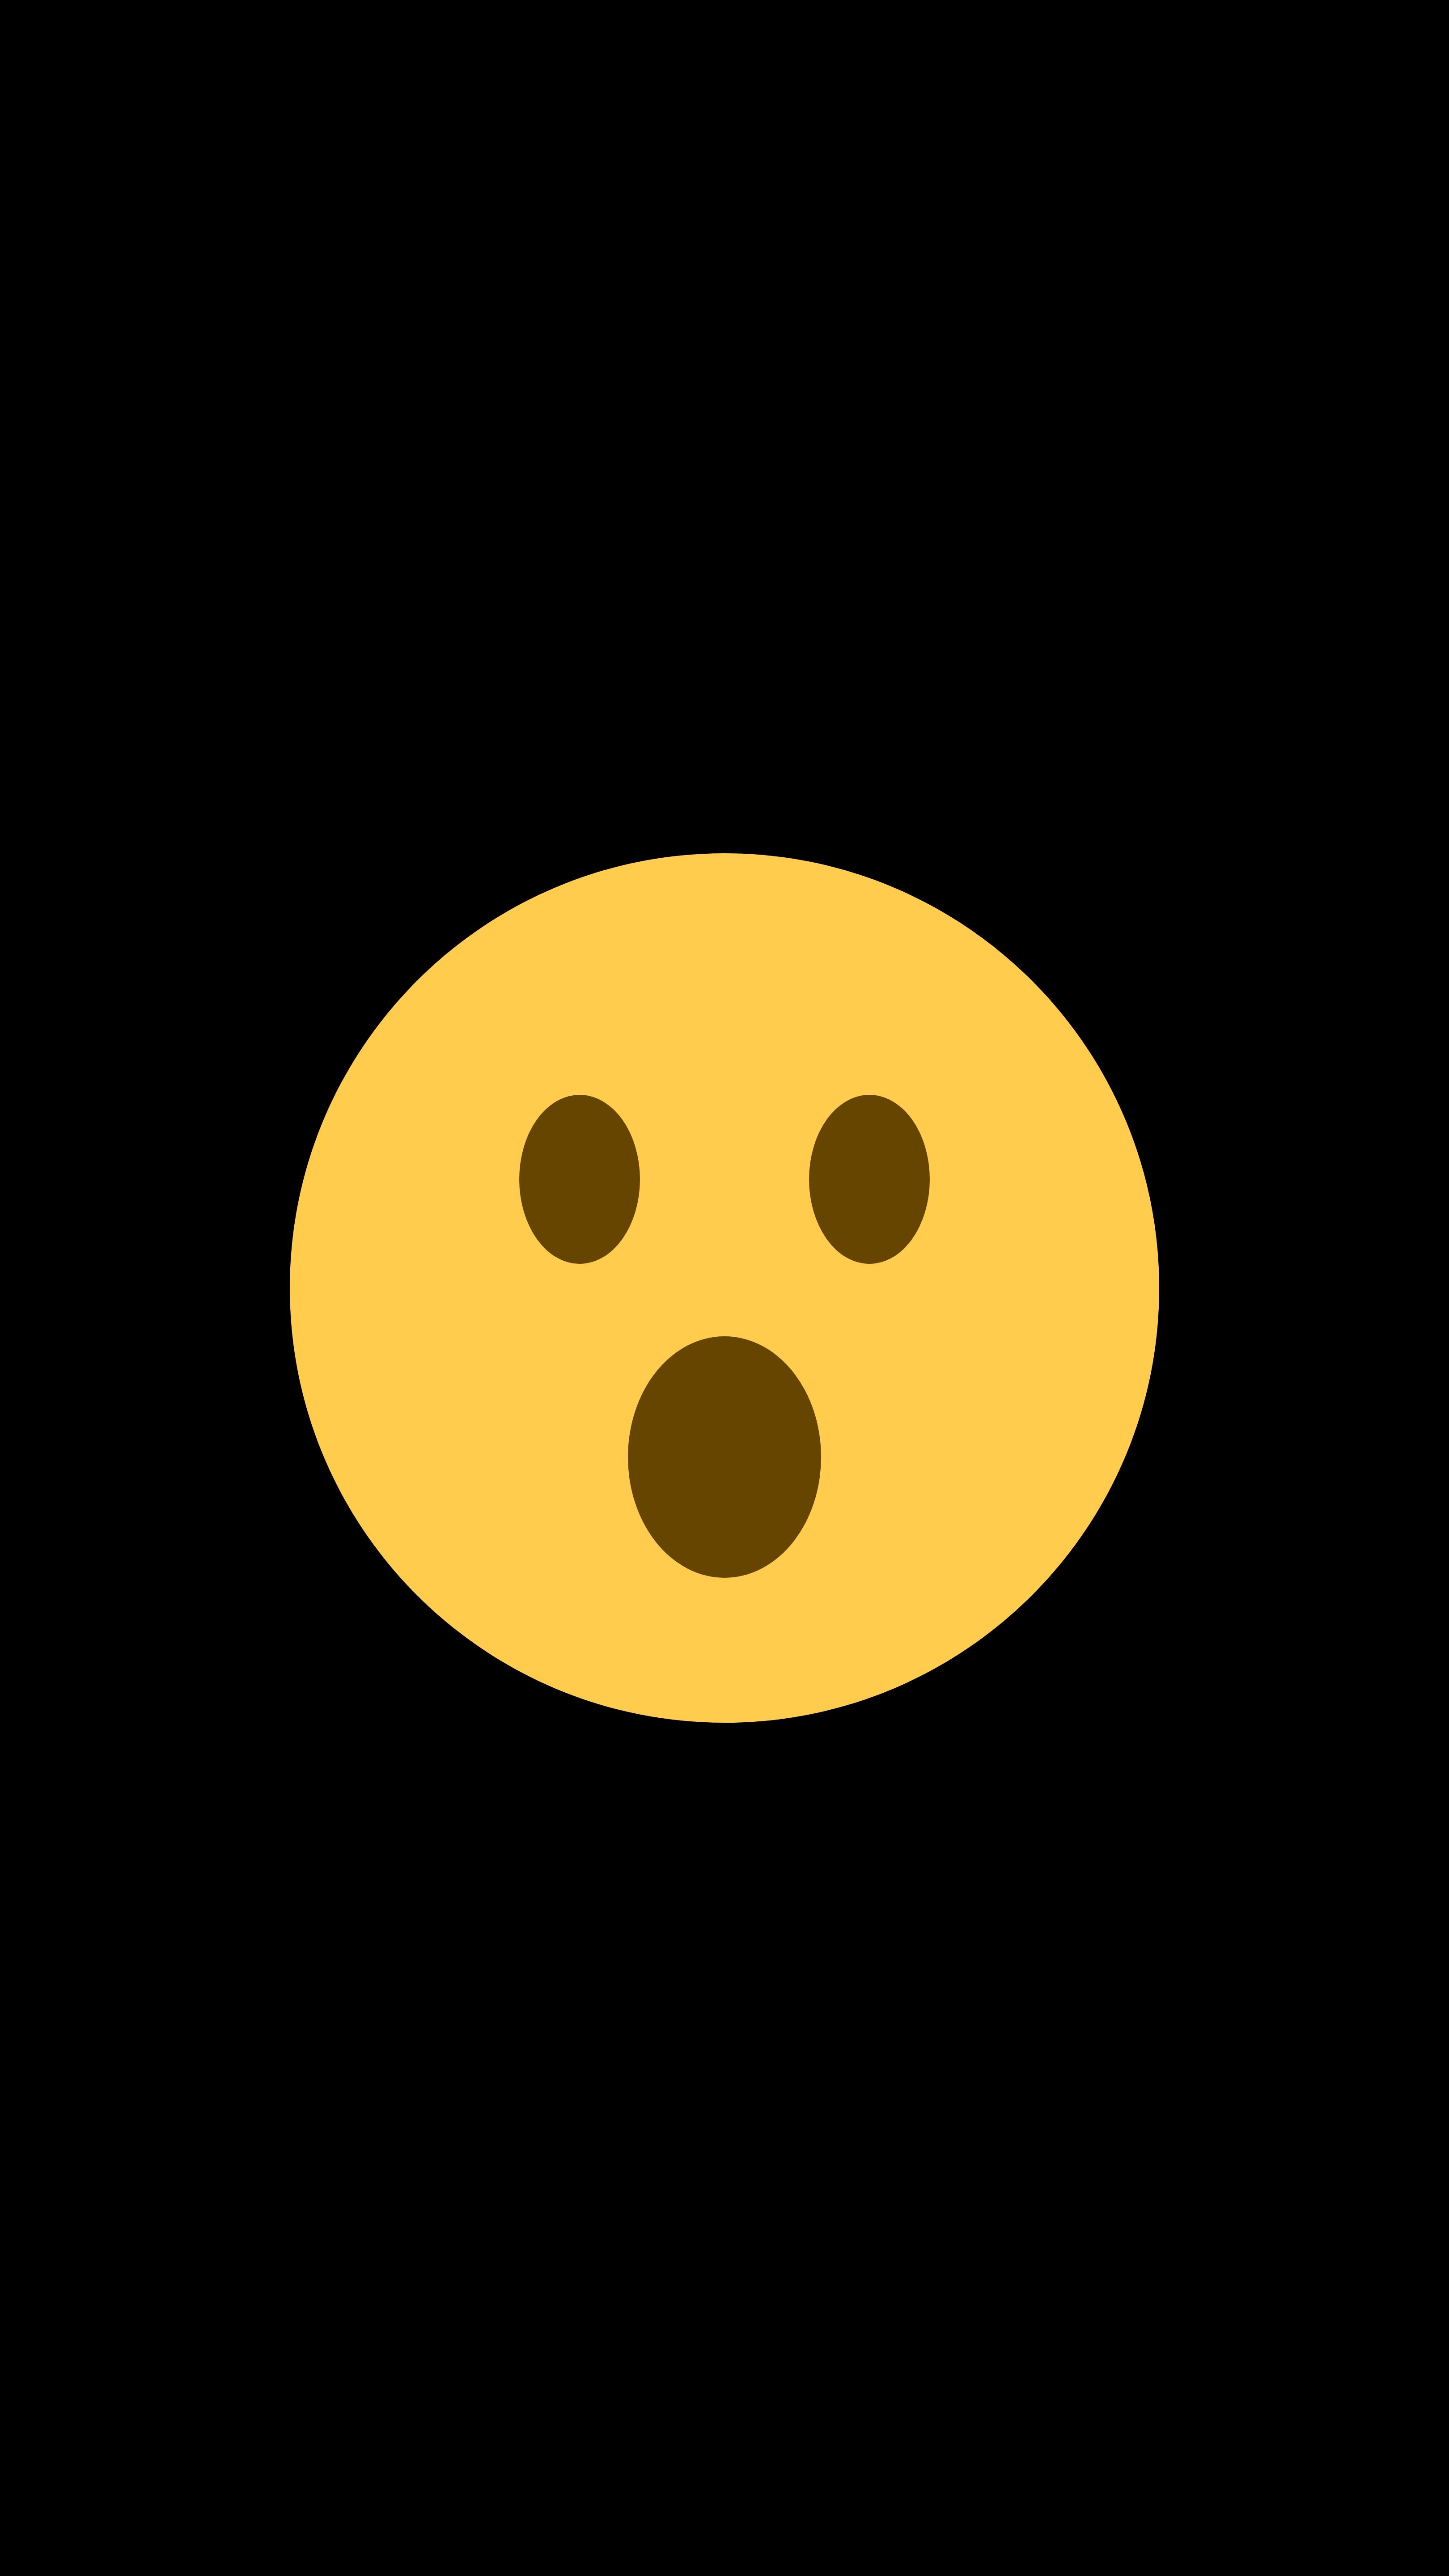 144274 Screensavers and Wallpapers Smiley for phone. Download smiley, art, vector, smile, emoticon, emoji pictures for free